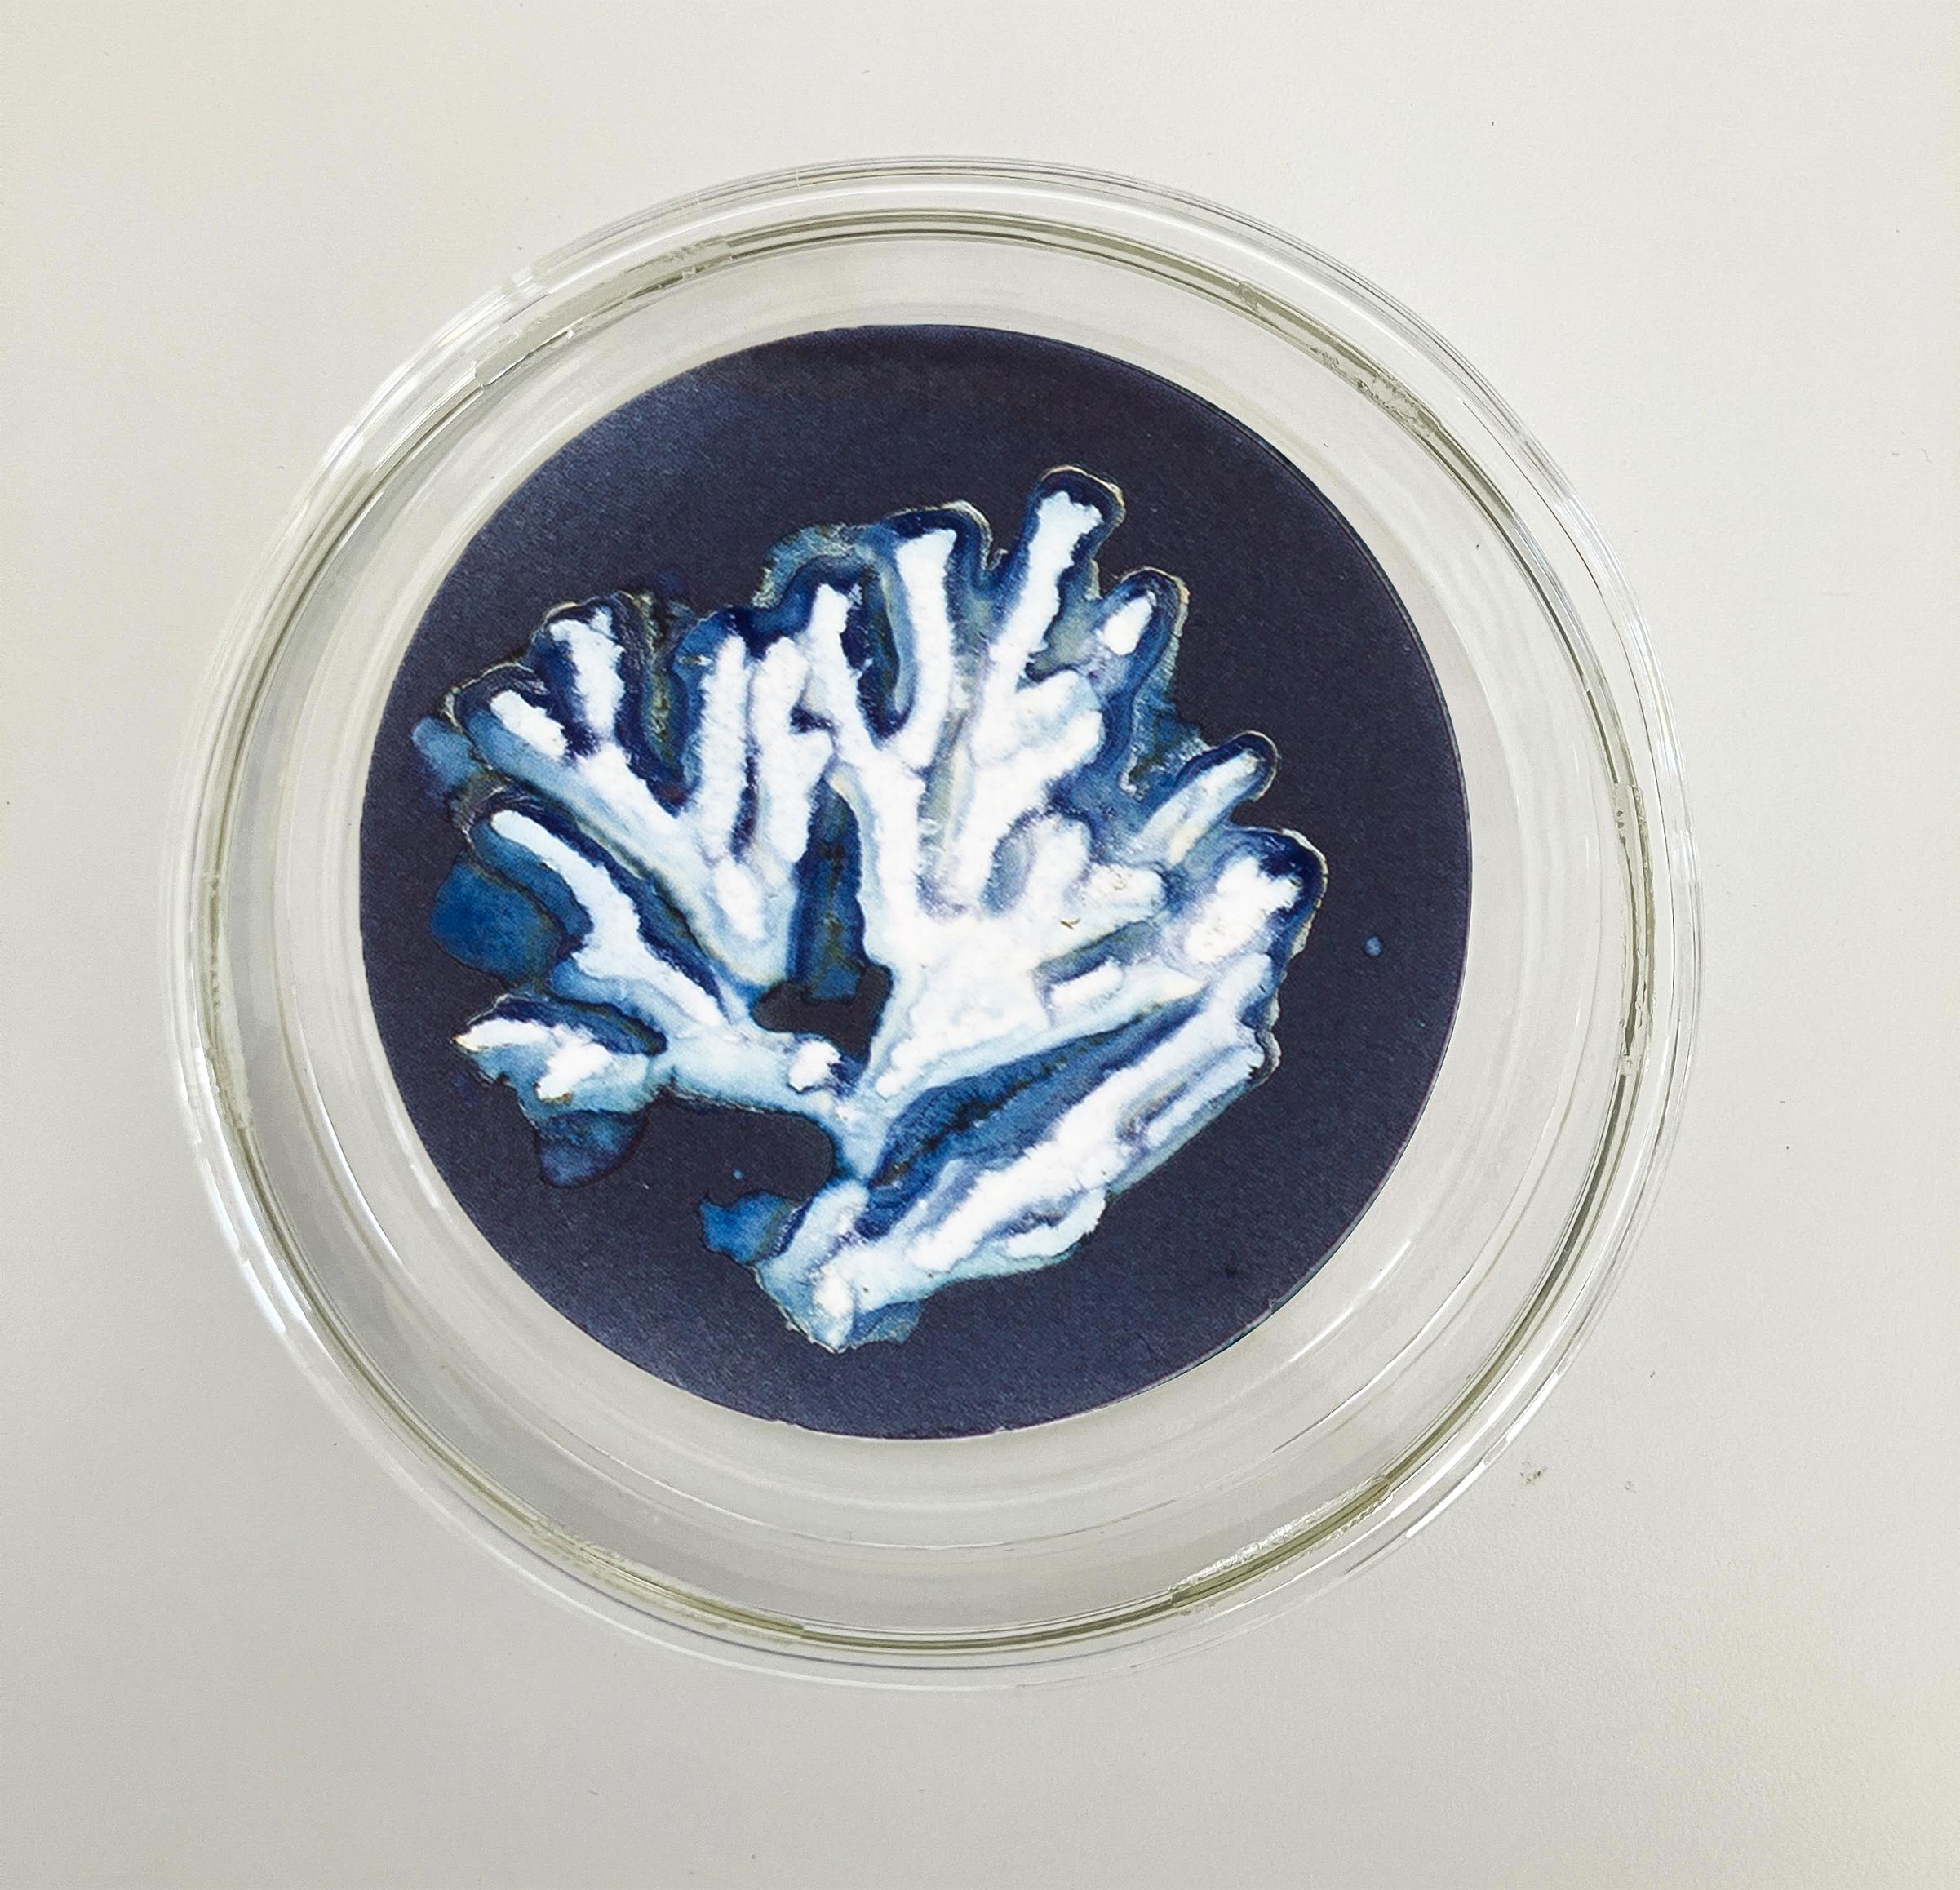 Algas 11, 22 y 67. Cyanotype photograhs mounted in high resistance glass dish - Abstract Sculpture by Paola Davila